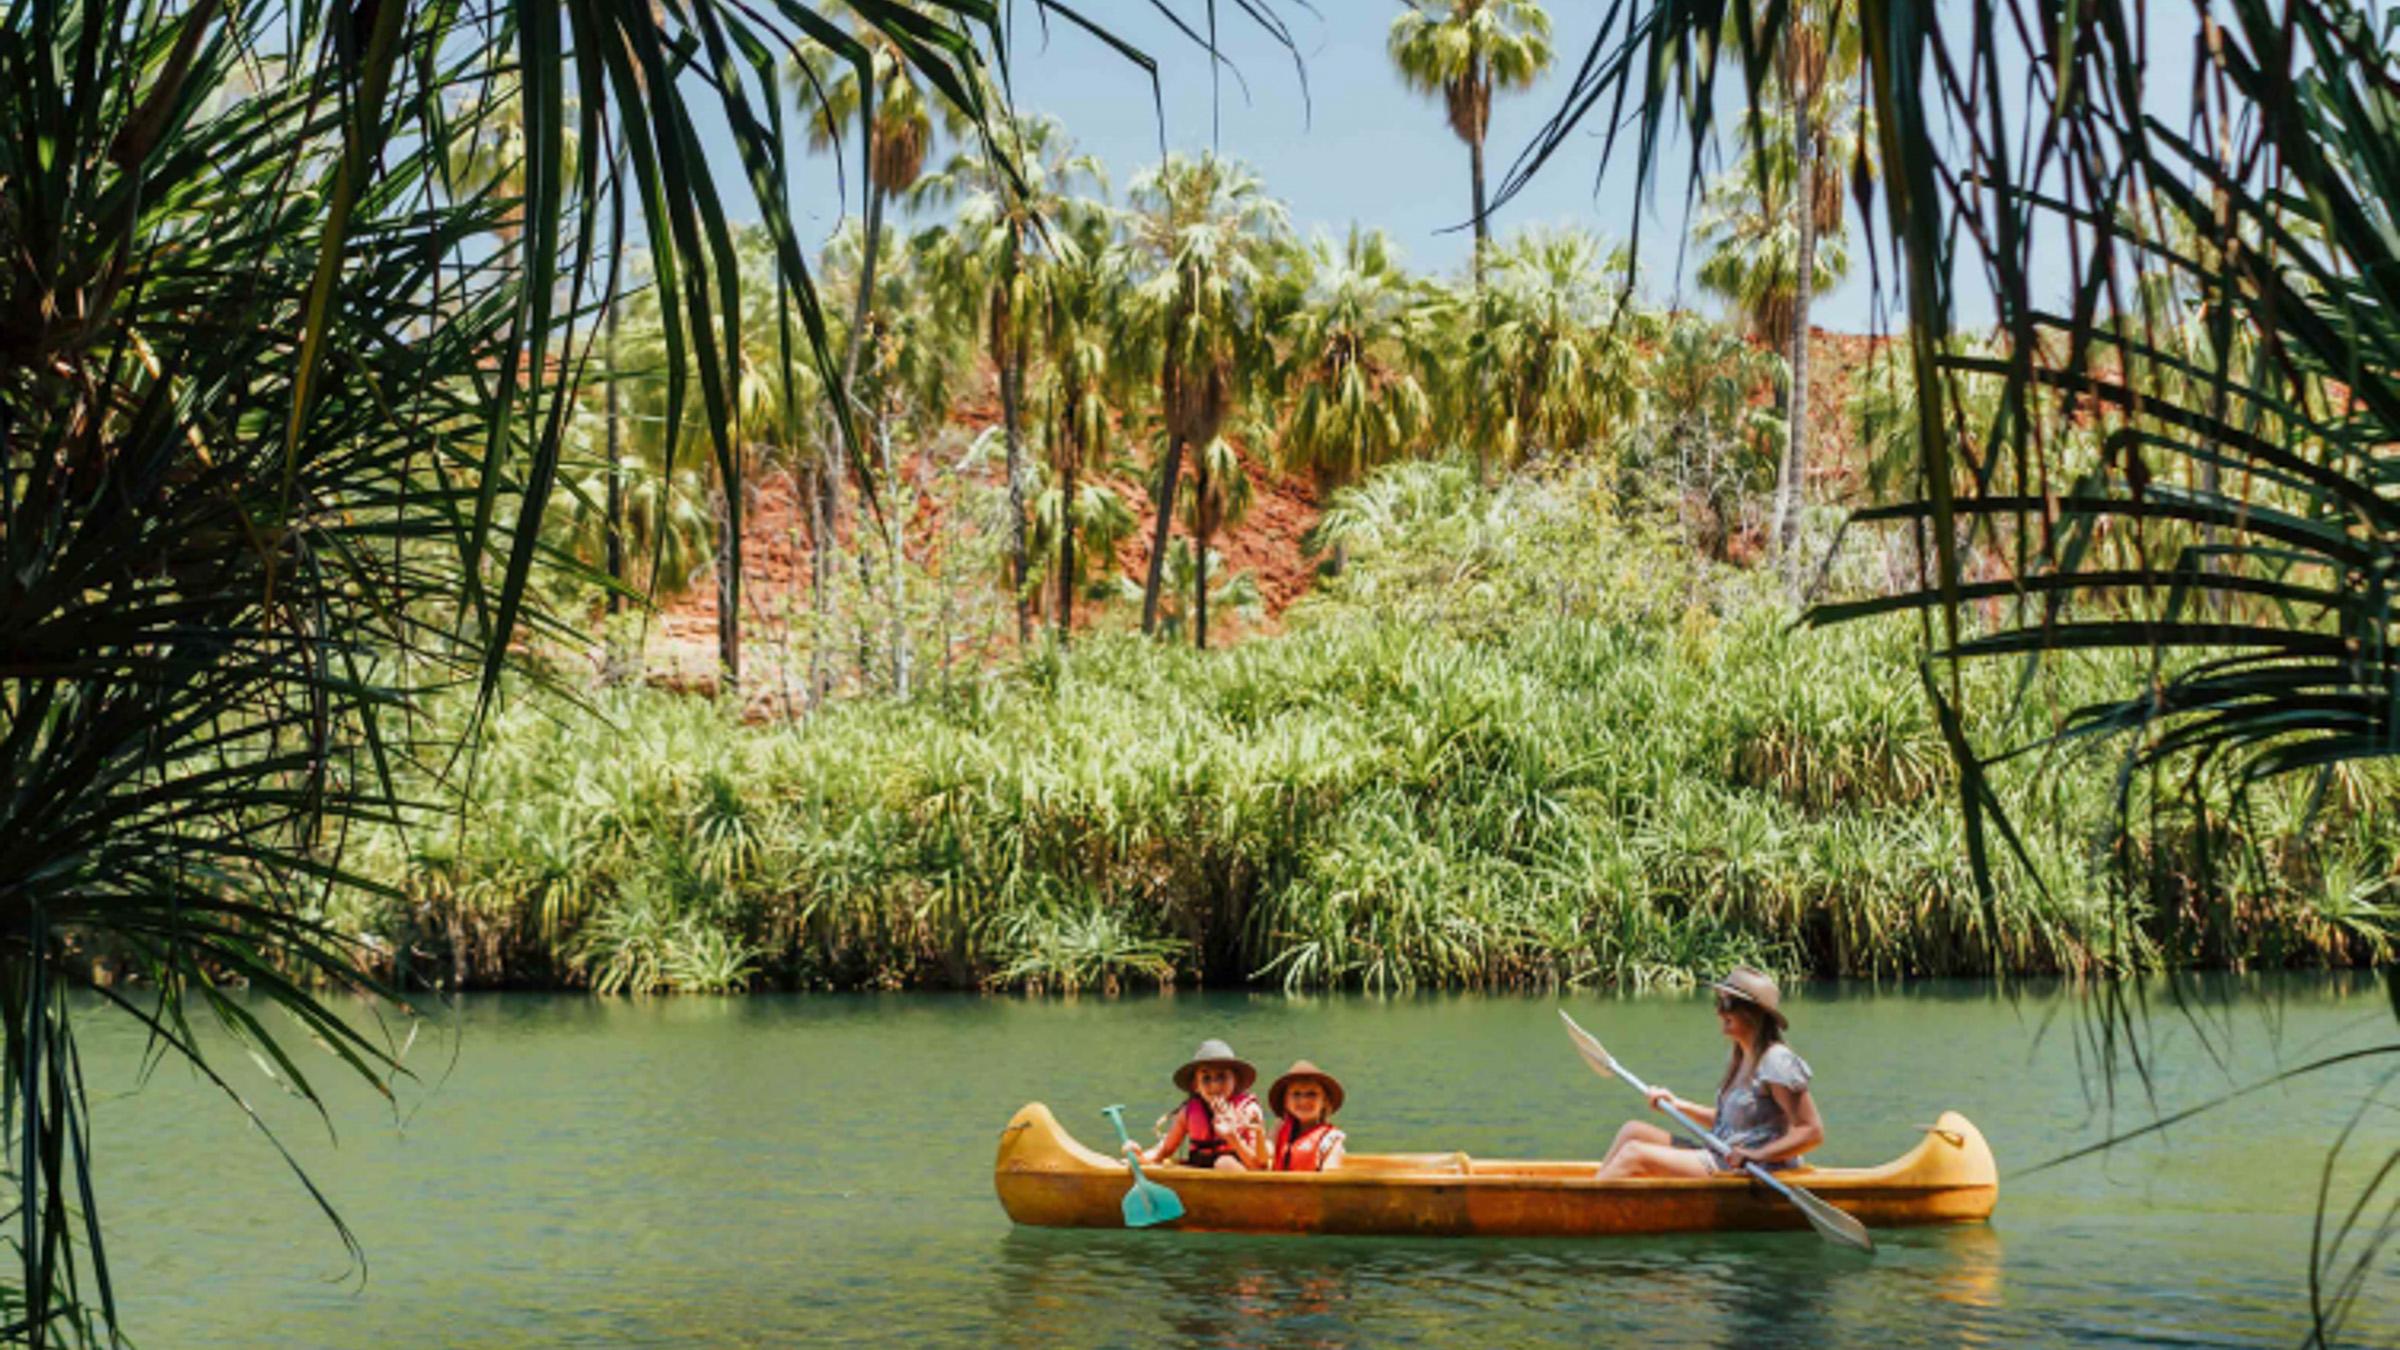 A mother and her two children canoe up a small river with tropical greenery on both shores